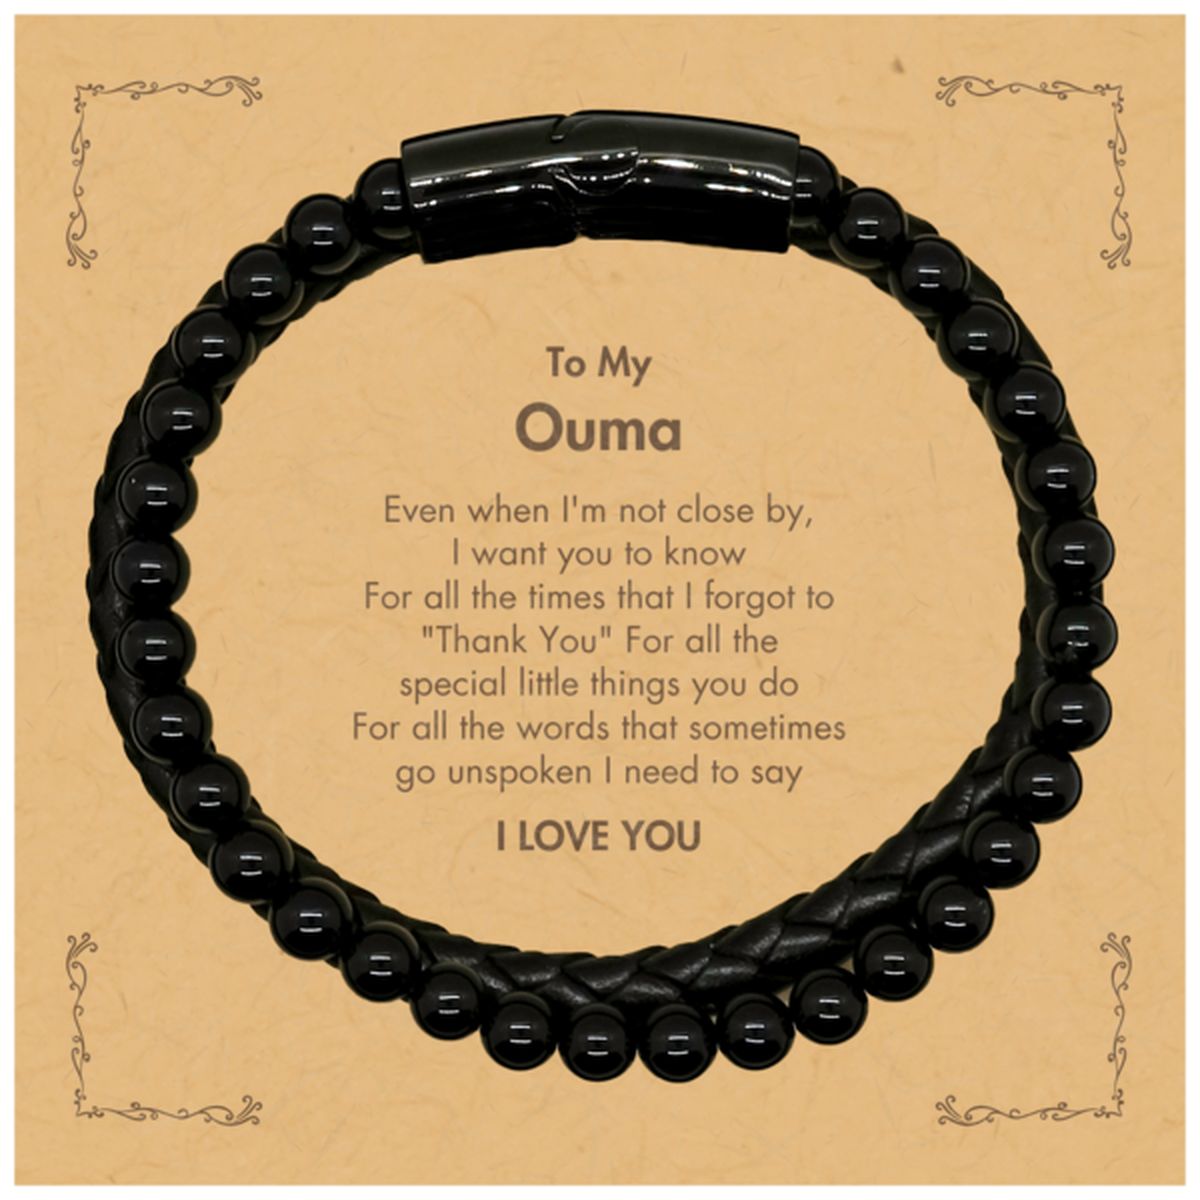 Thank You Gifts for Ouma, Keepsake Stone Leather Bracelets Gifts for Ouma Birthday Mother's day Father's Day Ouma For all the words That sometimes go unspoken I need to say I LOVE YOU